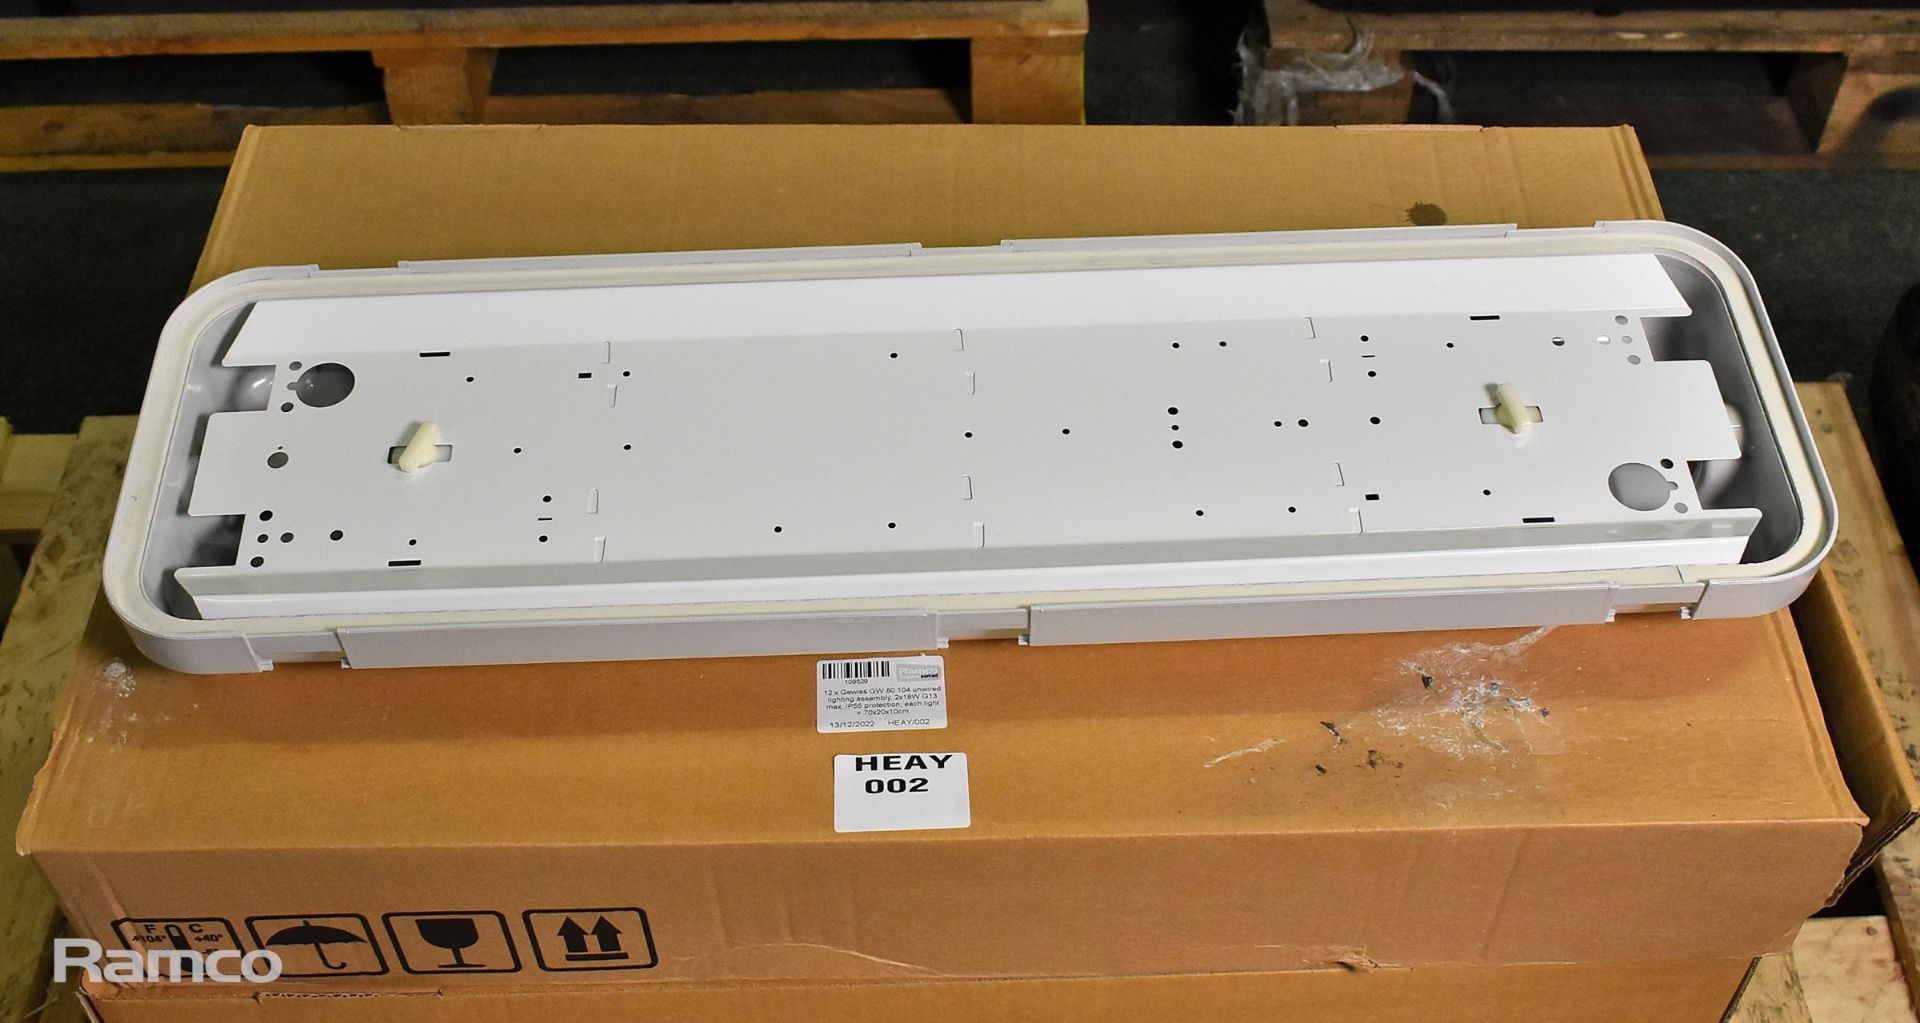 12x Gewiss GW 80 104 unwired lighting assembly, 2x18W G13 max, IP55 protection - Image 3 of 3